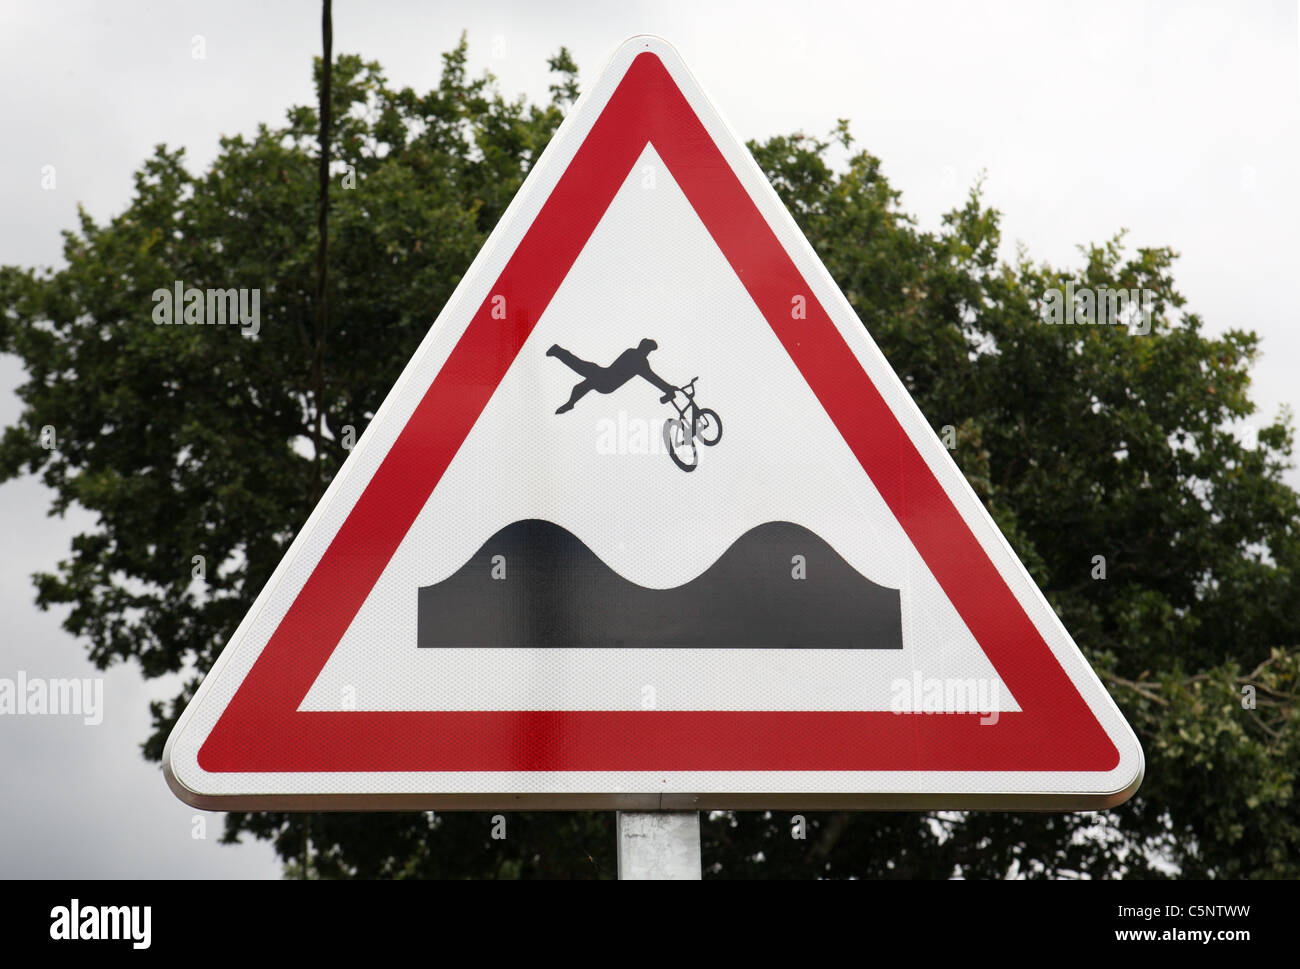 A road sign warning cyclists of an uneven surface ahead that could lead to them being thrown from their bikes. Brittany, France. Stock Photo